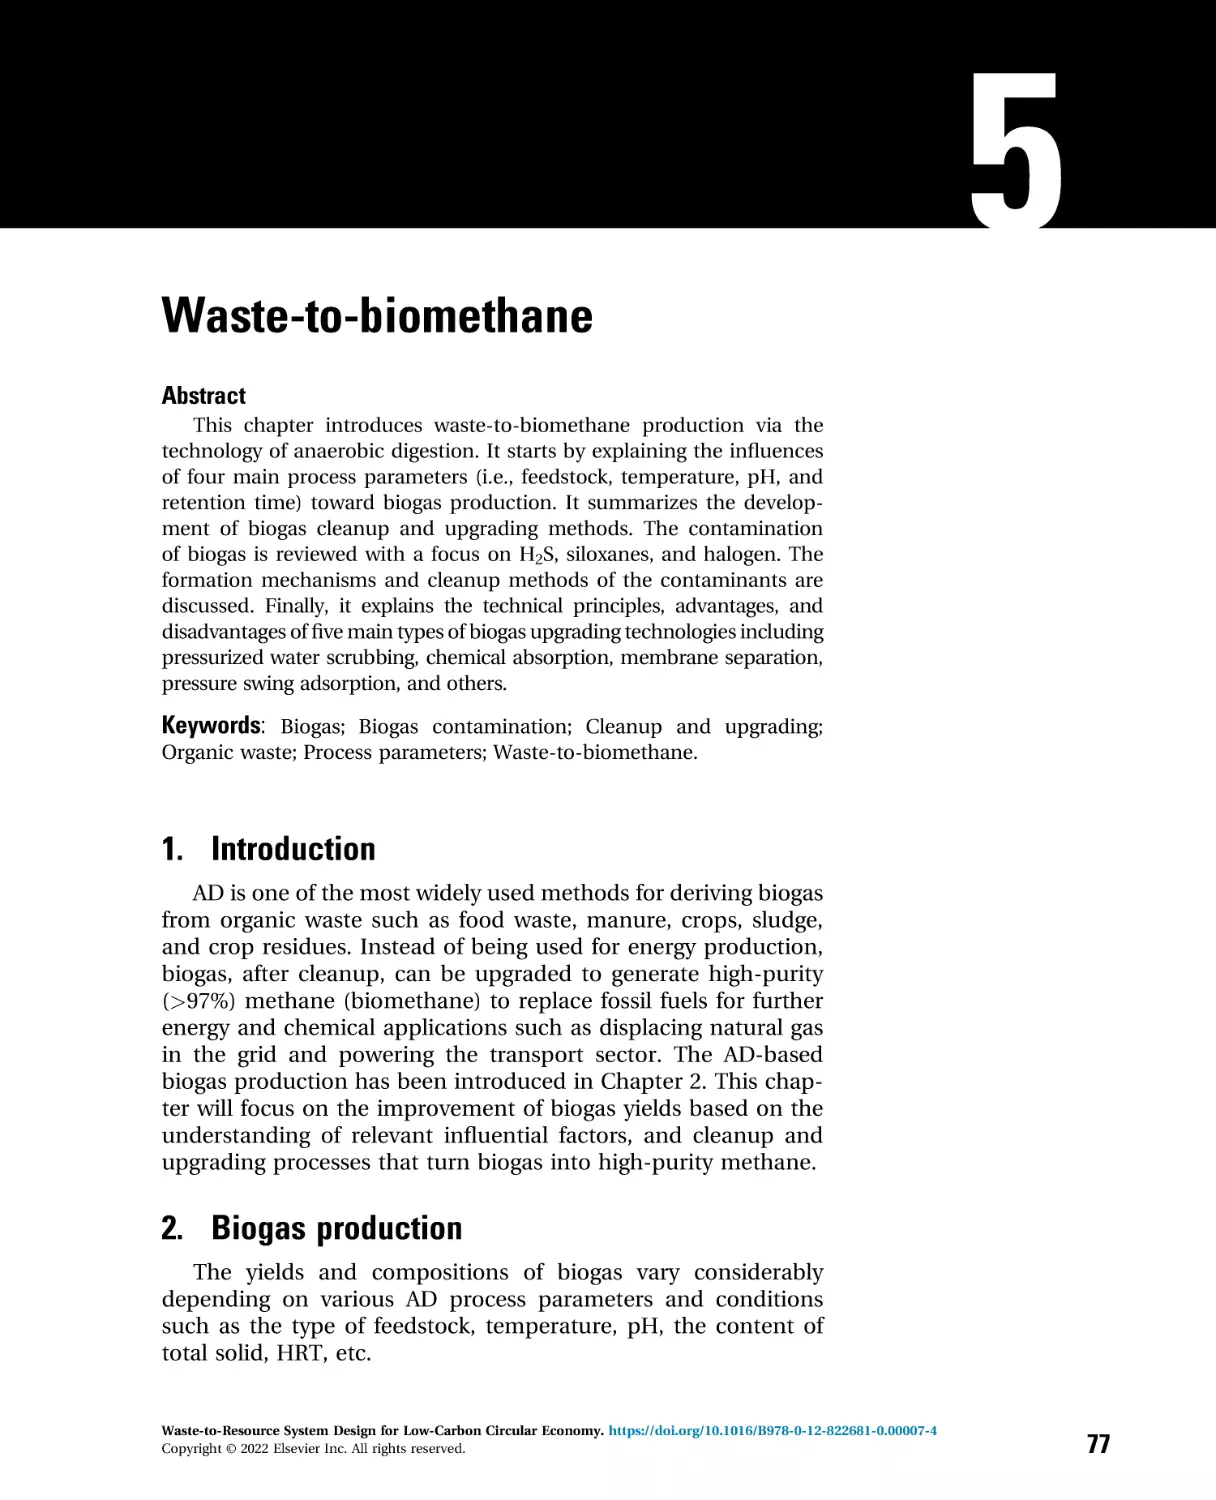 5 - Waste-to-biomethane
1. Introduction
2. Biogas production